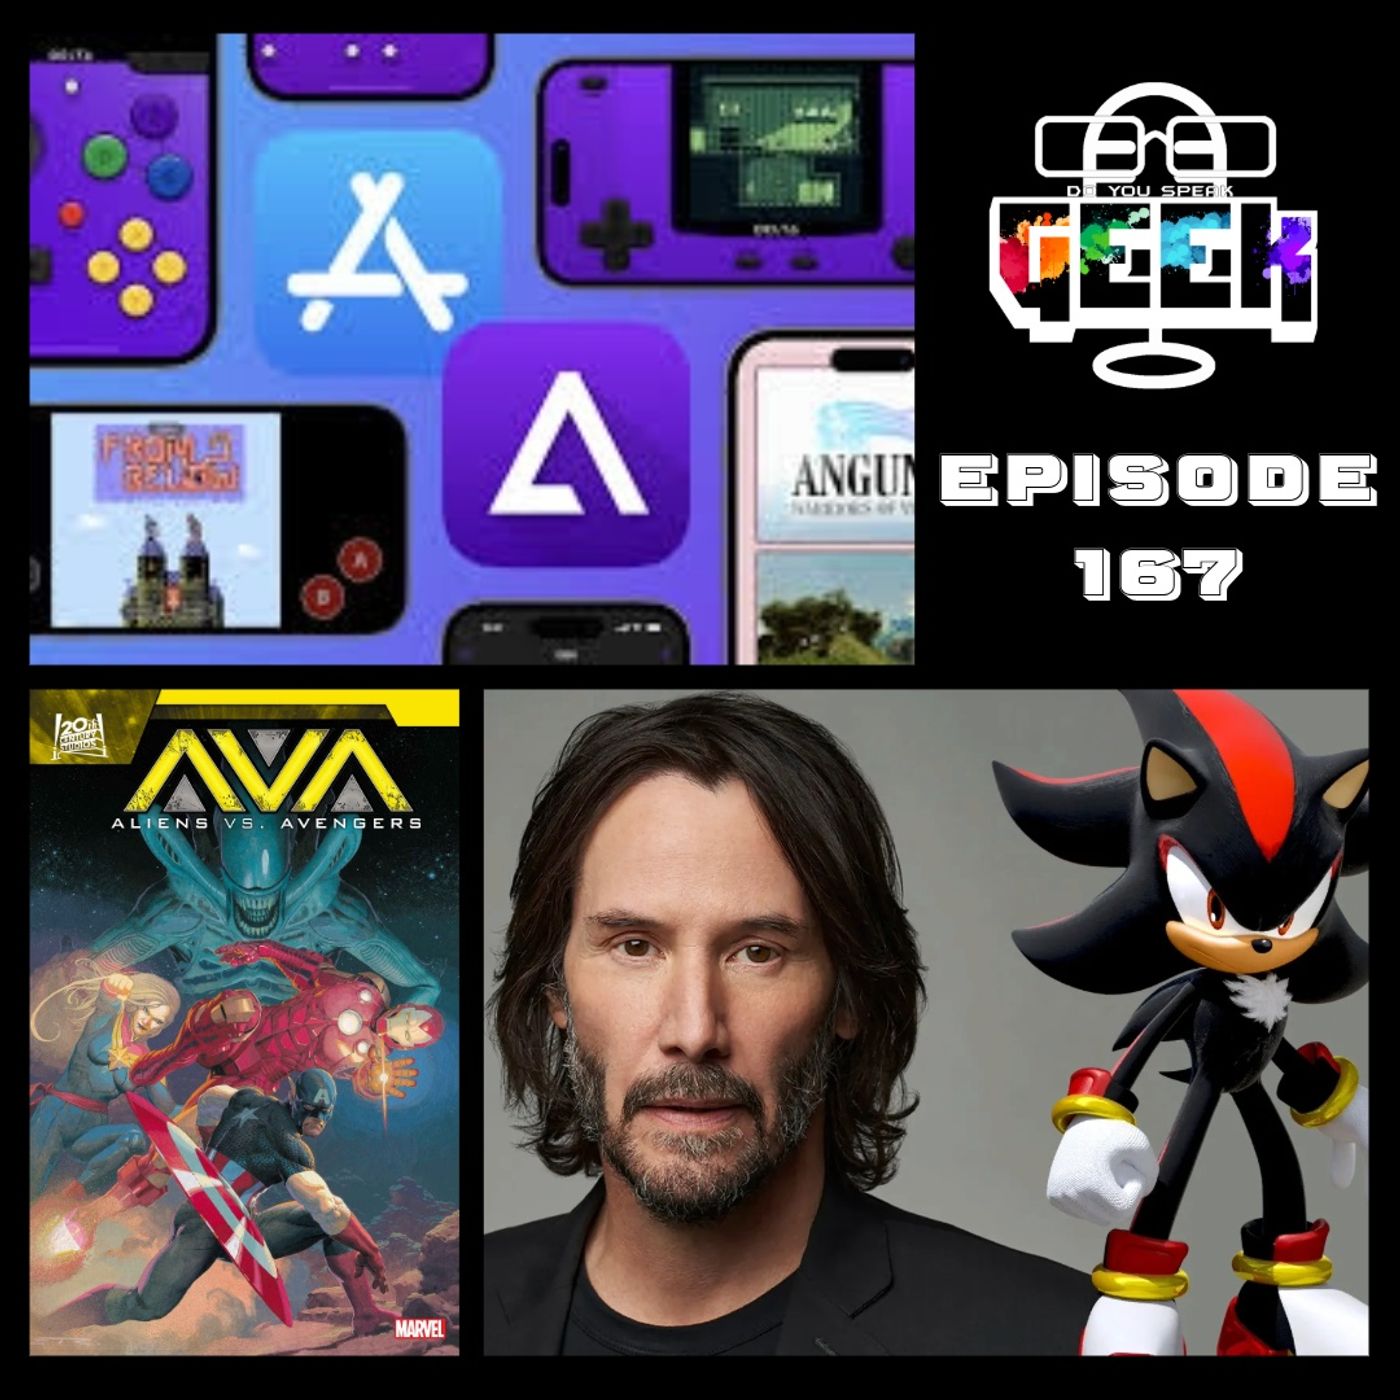 Episode 167 (Keanu Reeves, Avengers VS Aliens, Delta and much more)